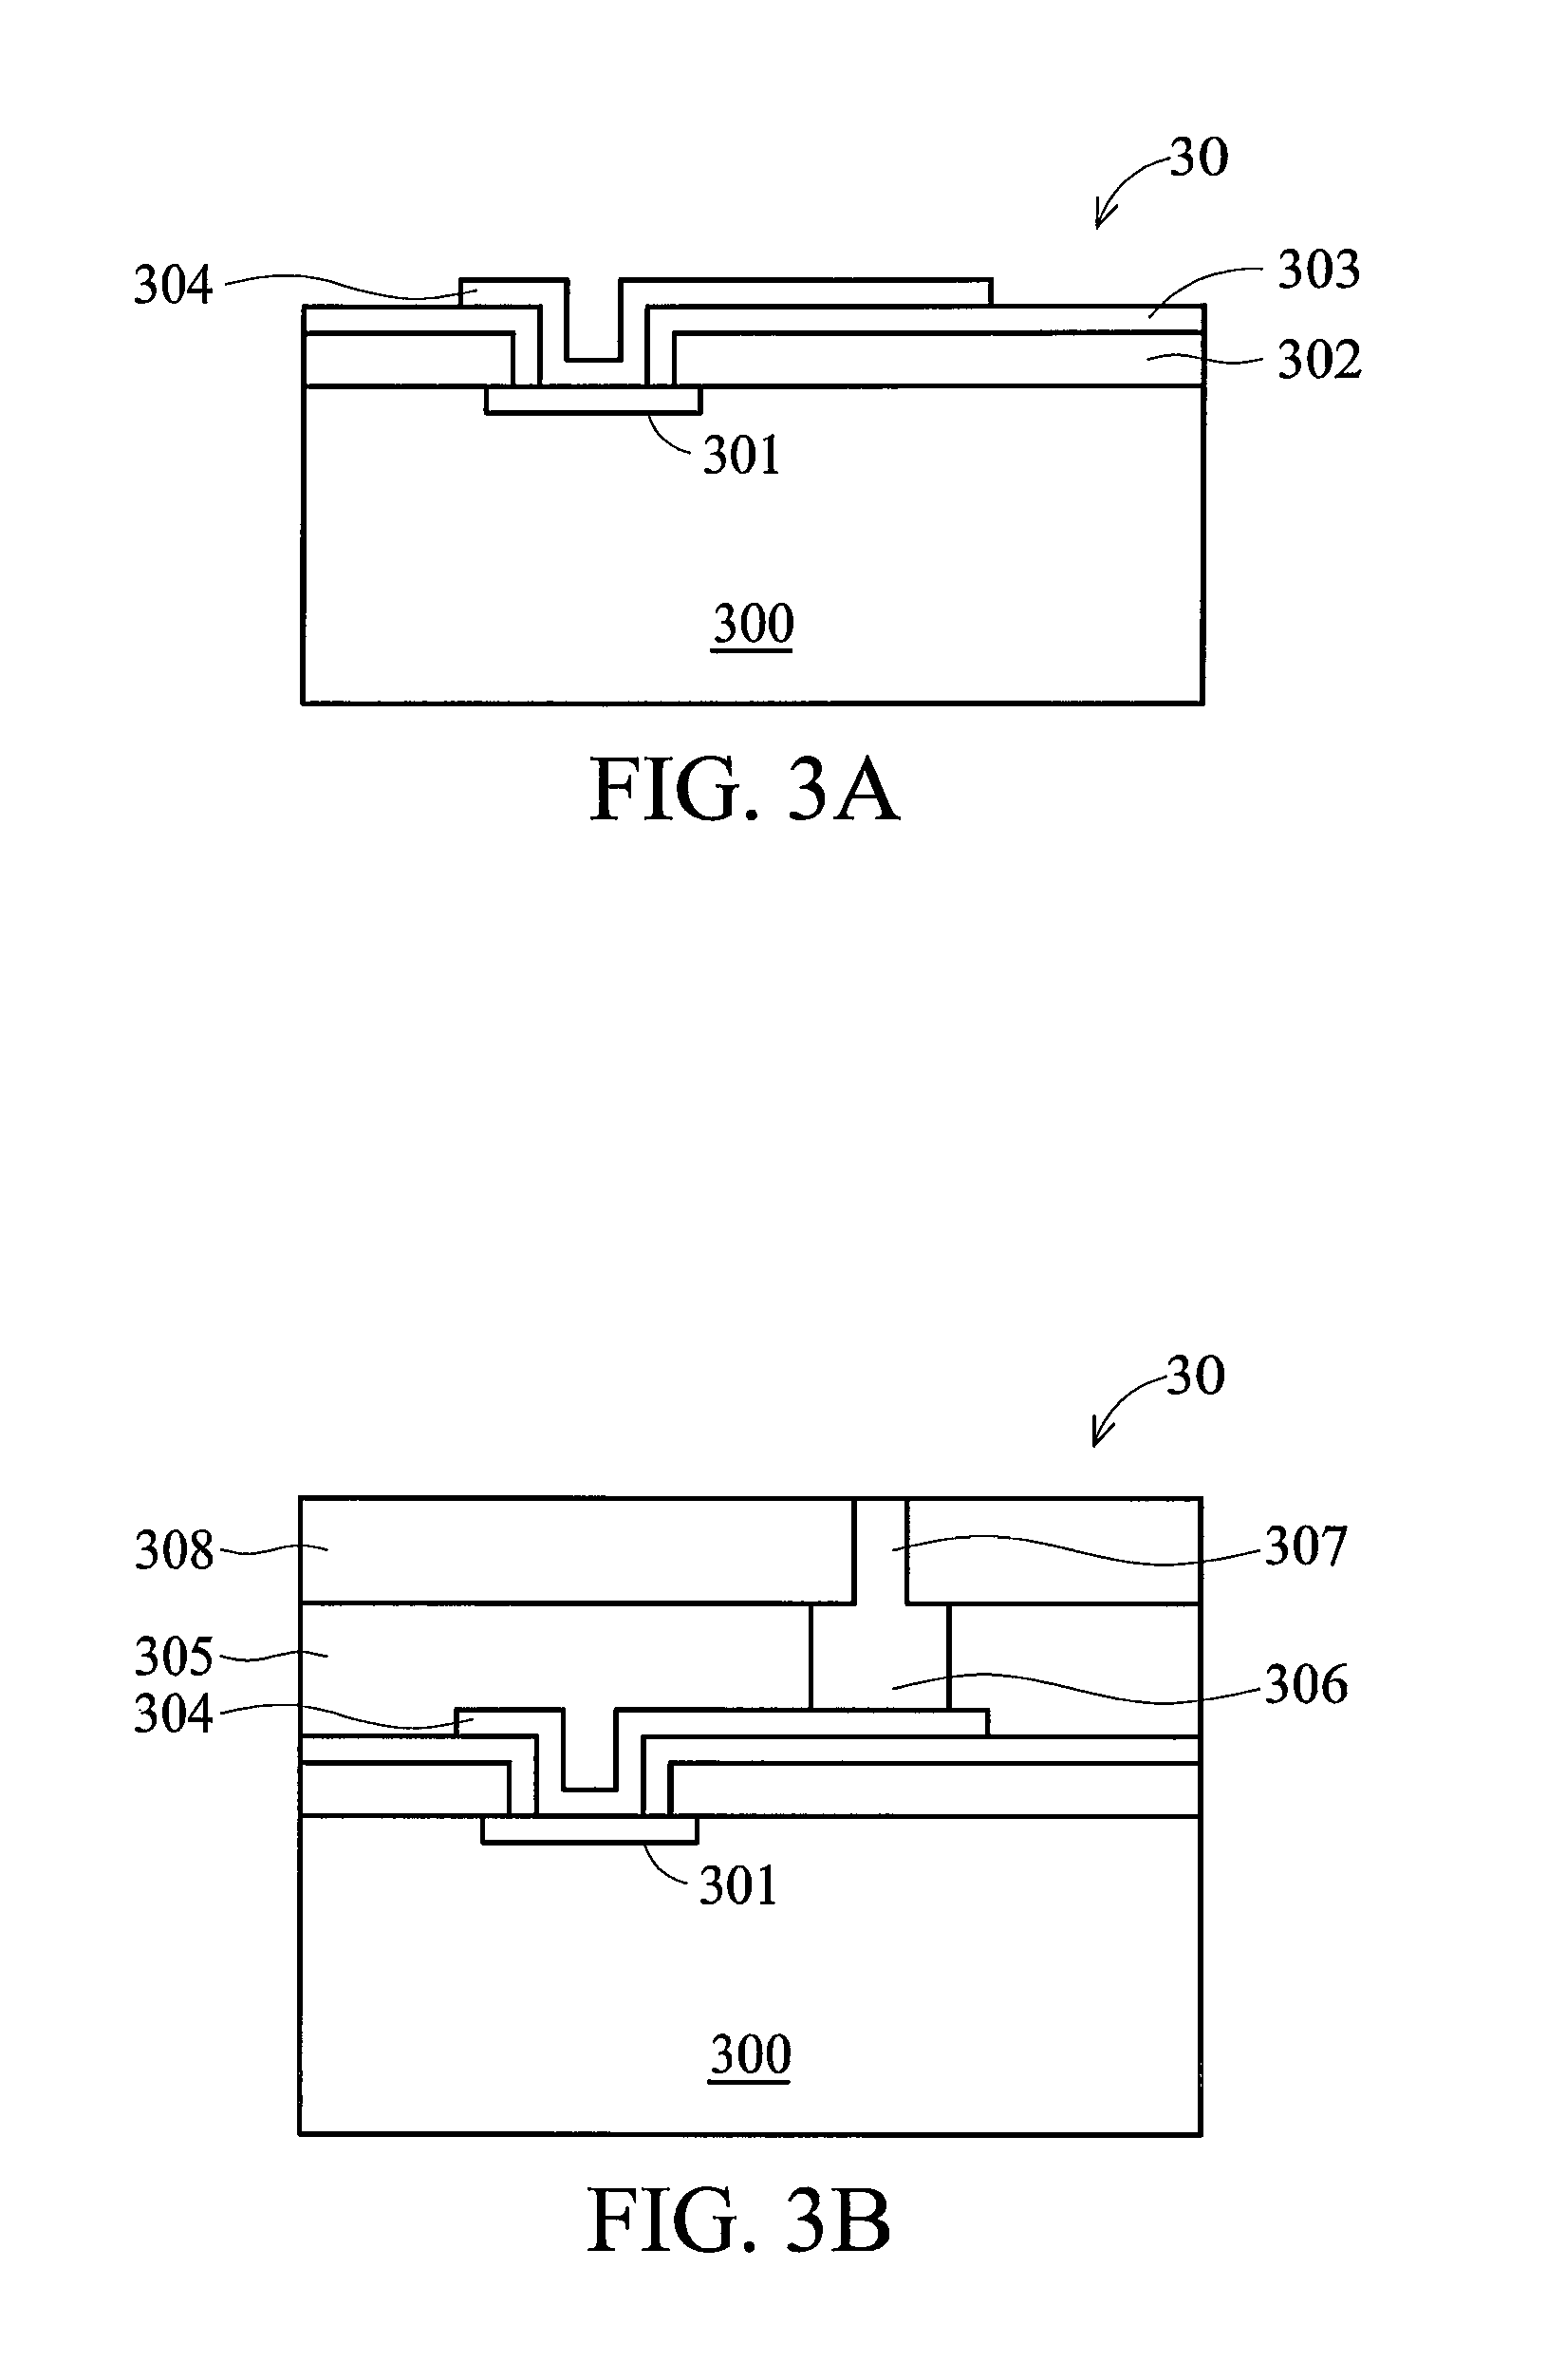 Enhanced copper posts for wafer level chip scale packaging